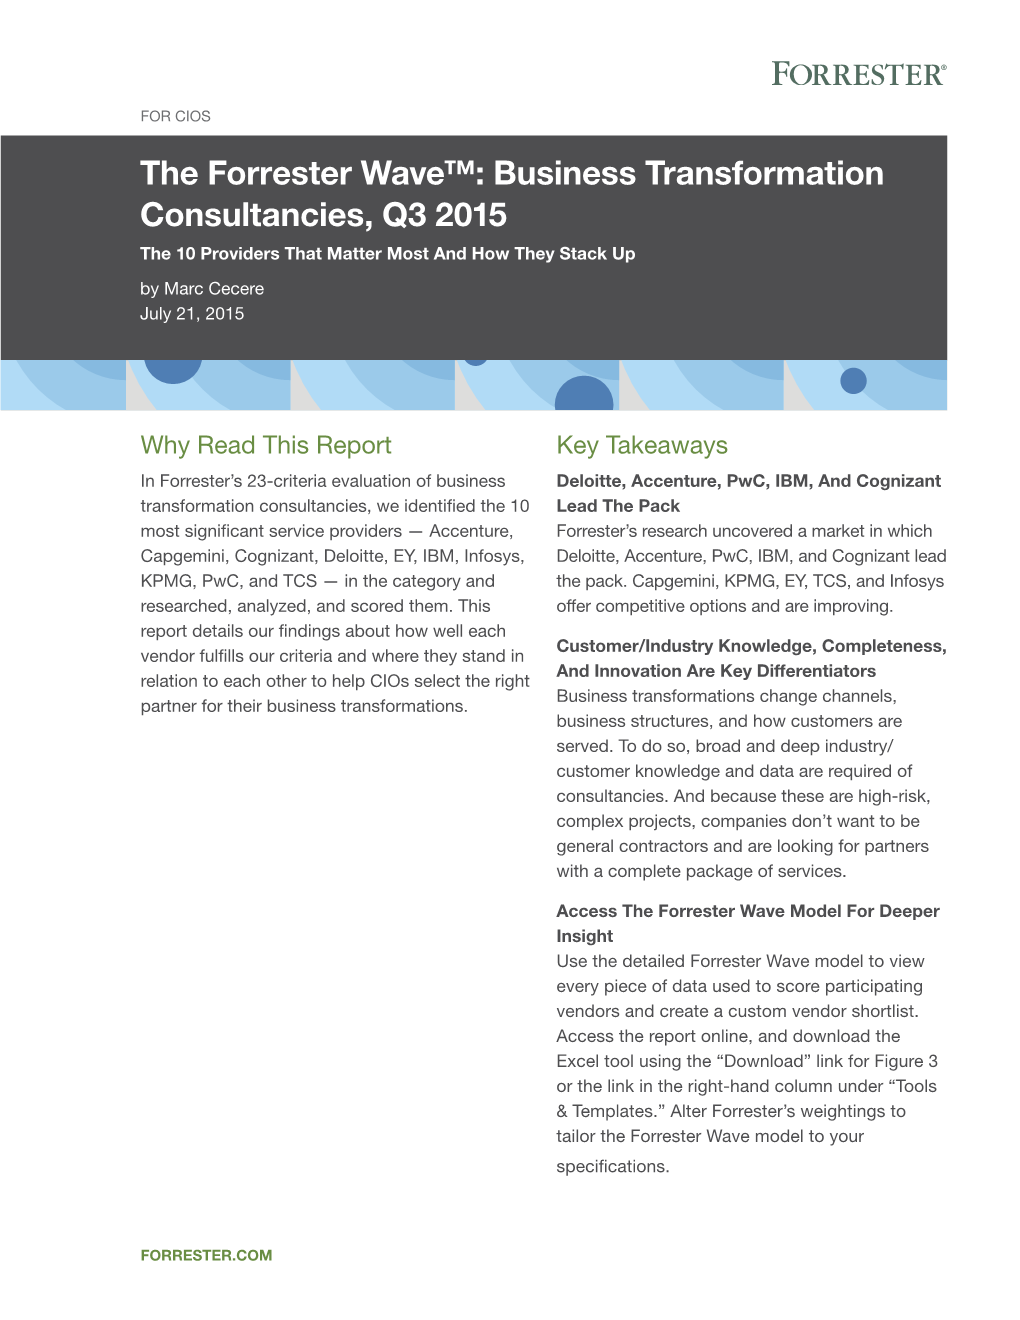 The Forrester Wave™: Business Transformation Consultancies, Q3 2015 the 10 Providers That Matter Most and How They Stack up by Marc Cecere July 21, 2015